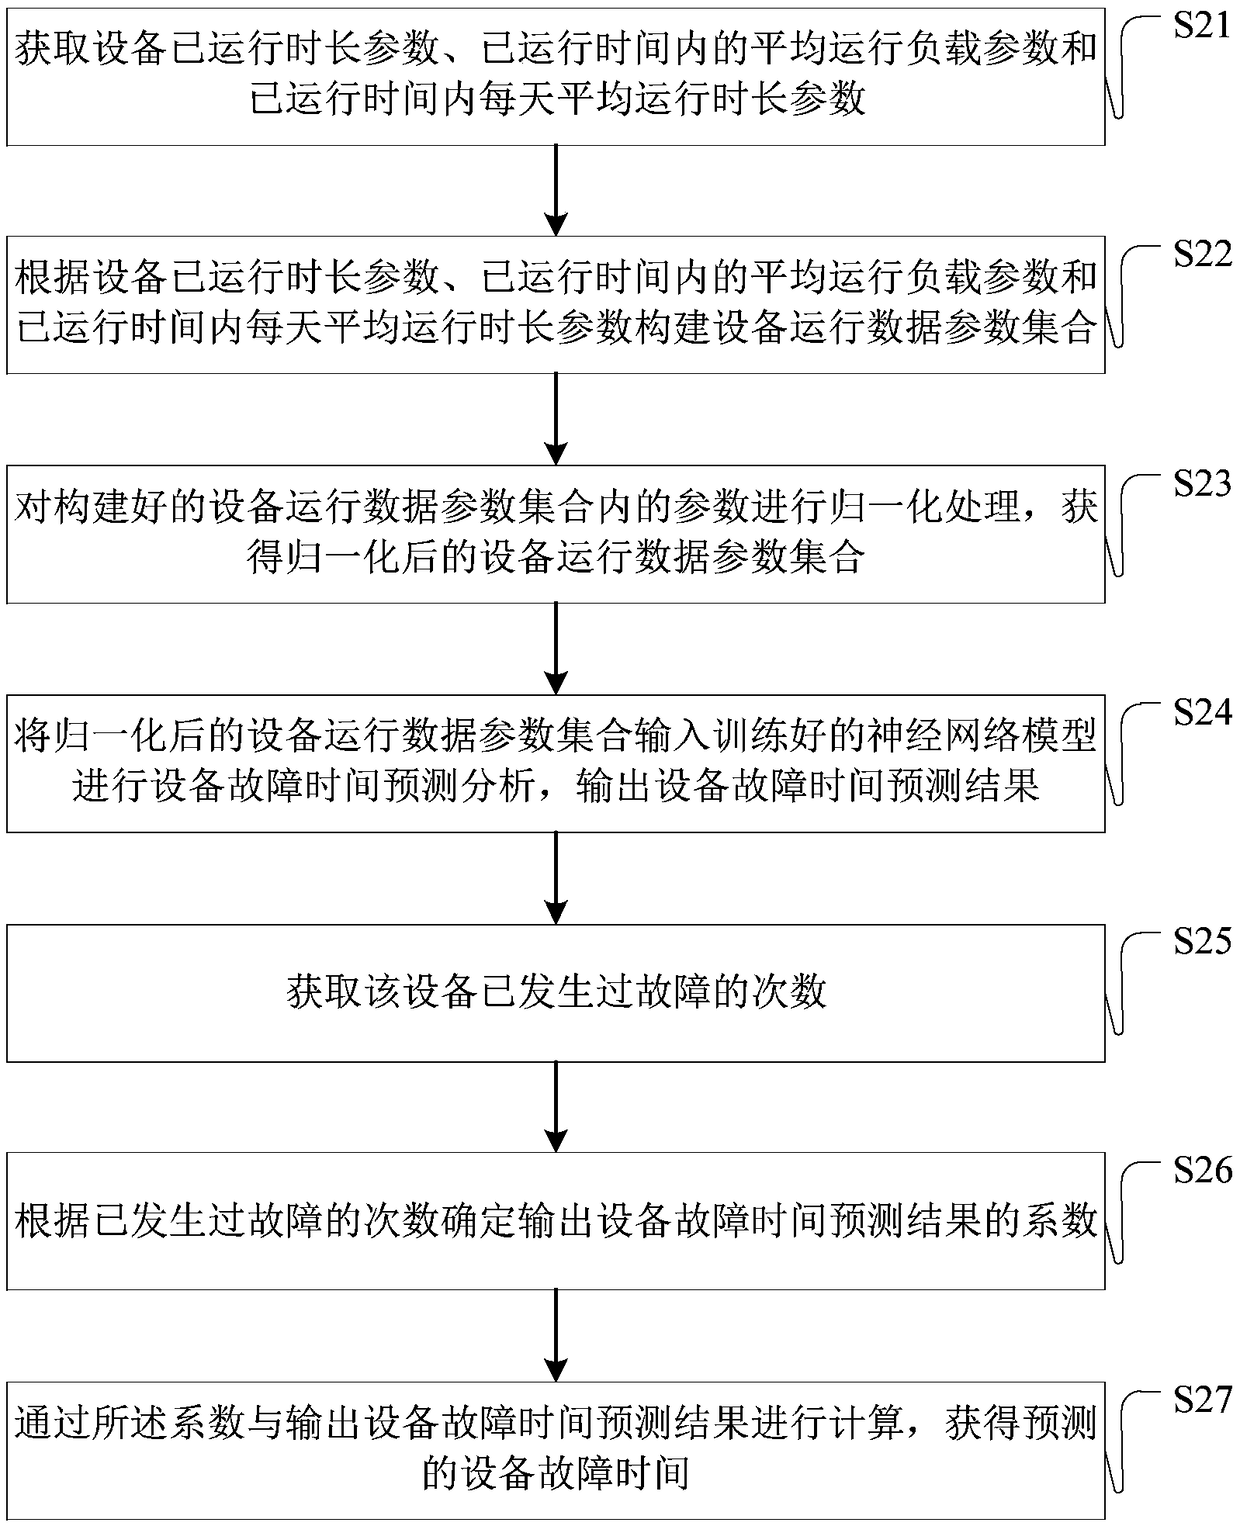 Fault prediction method and system for intelligent manufacturing equipment based on neural network model